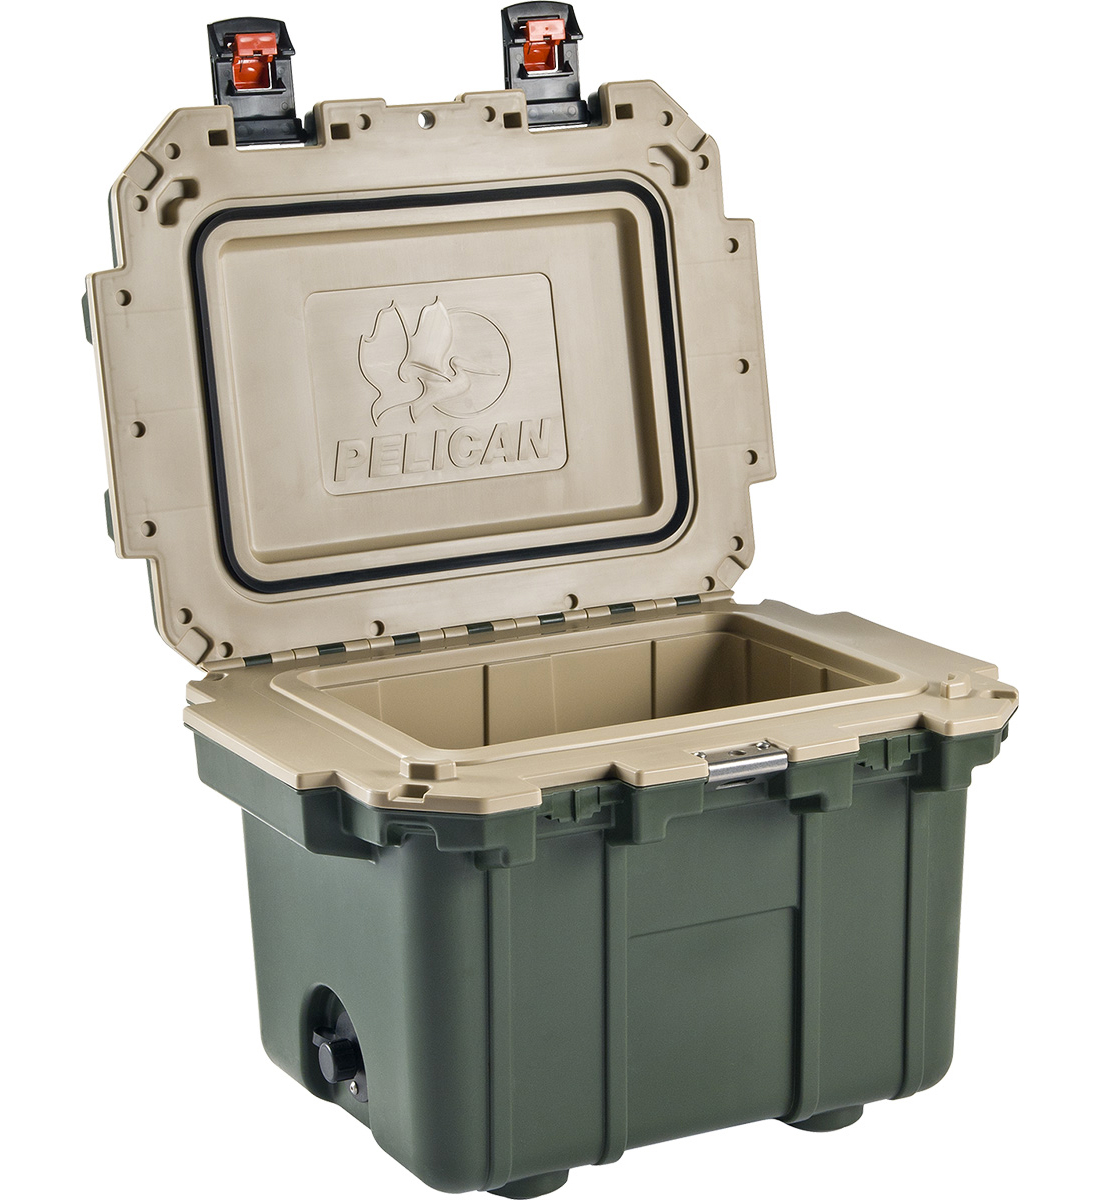 Pelican Built An Indestructible Cooler In Case Your Beer Falls Off A Cliff 